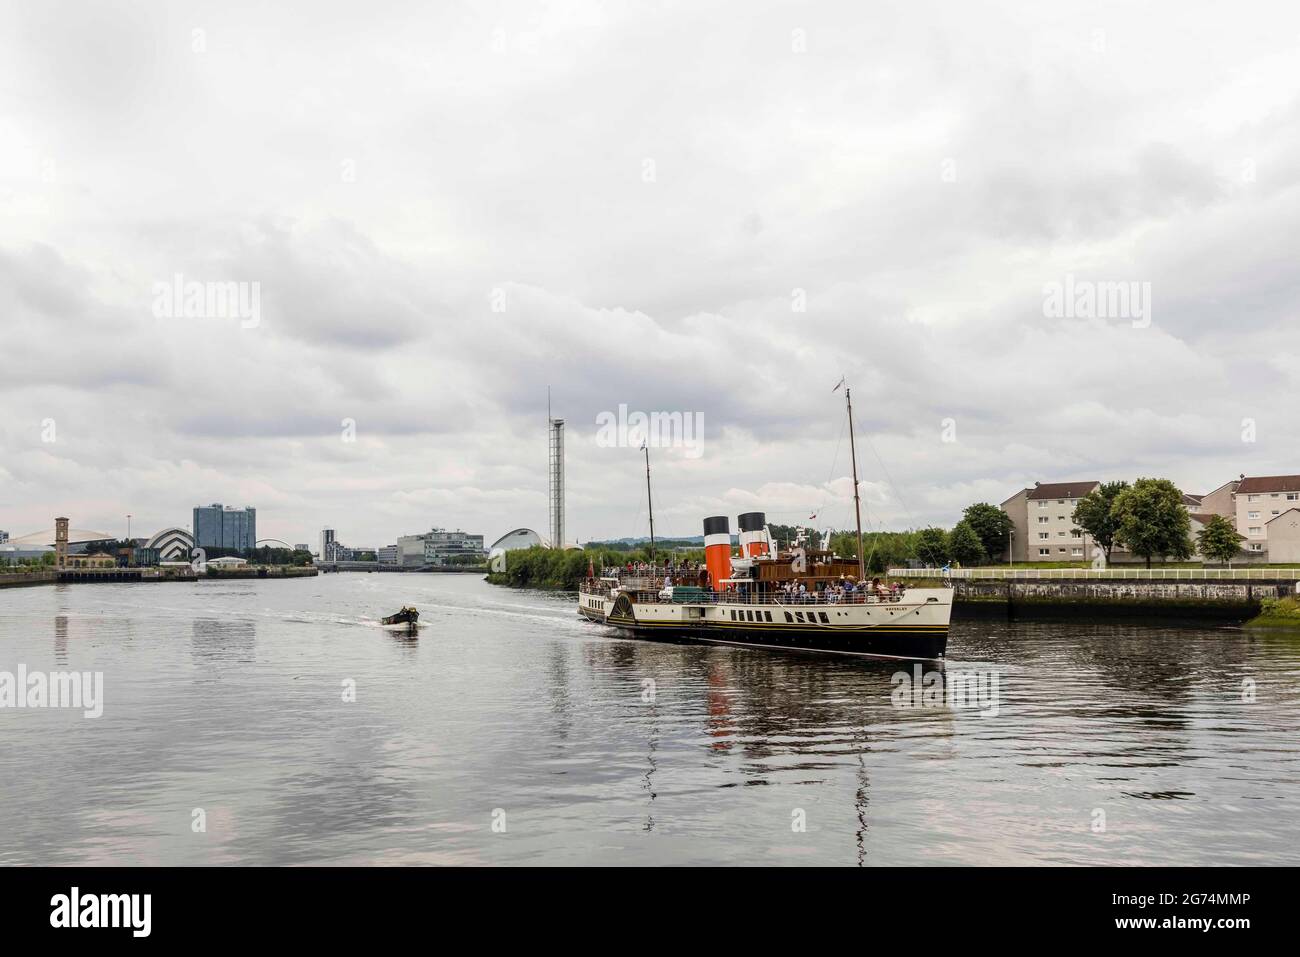 Glasgow, Scotland, UK. 11th July 2021. Pictured: The steamship Waverley leaves Glasgow at the start of its daily trip around the Clyde estuary. Credit: Rich Dyson/Alamy Live News Stock Photo